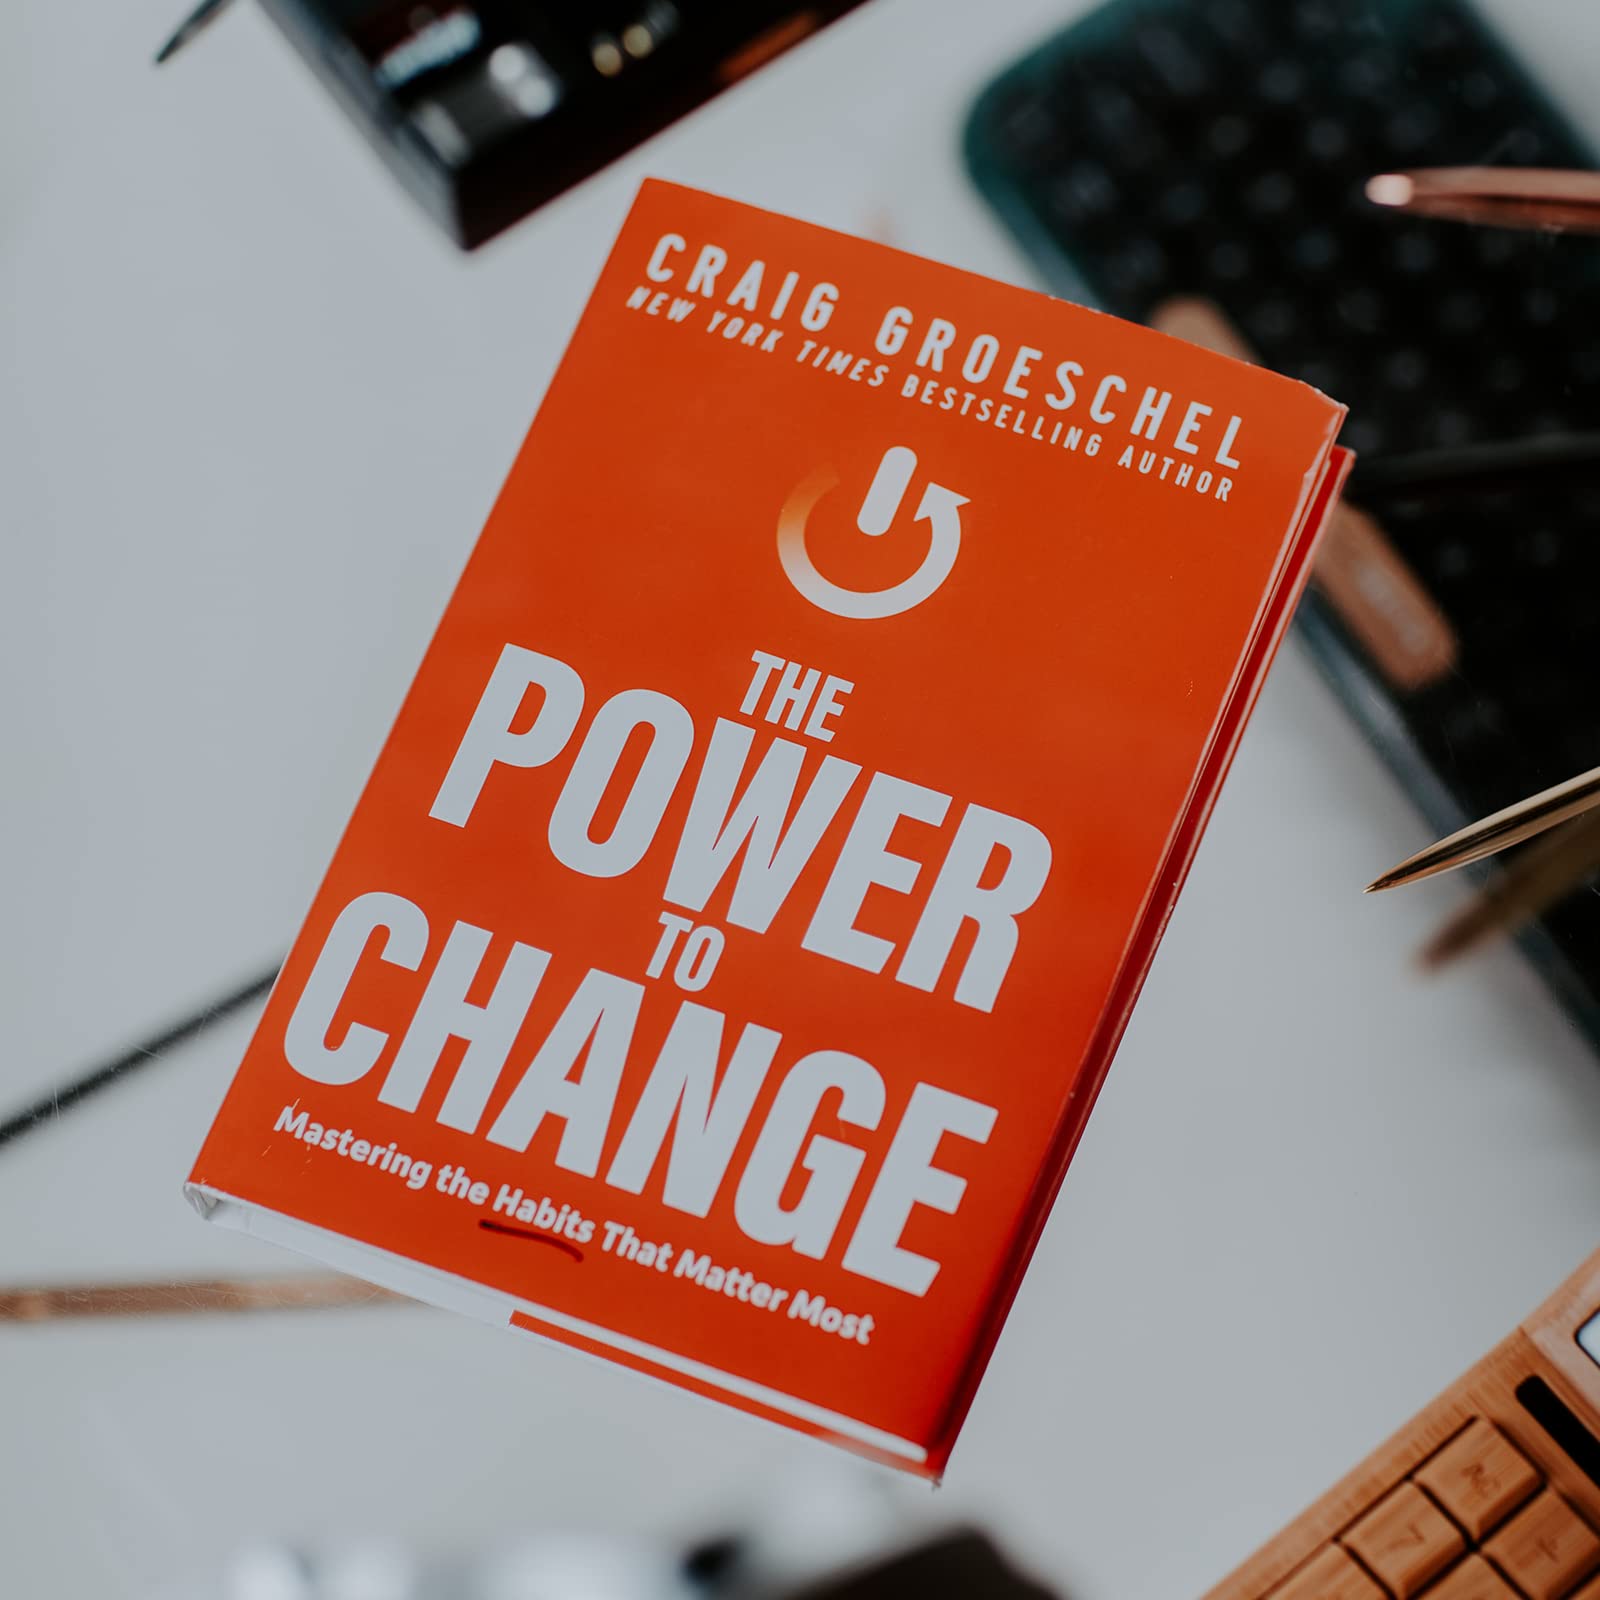 The Power To Change - Mastering the Habits That Matter Most Book by Craig Groeschel